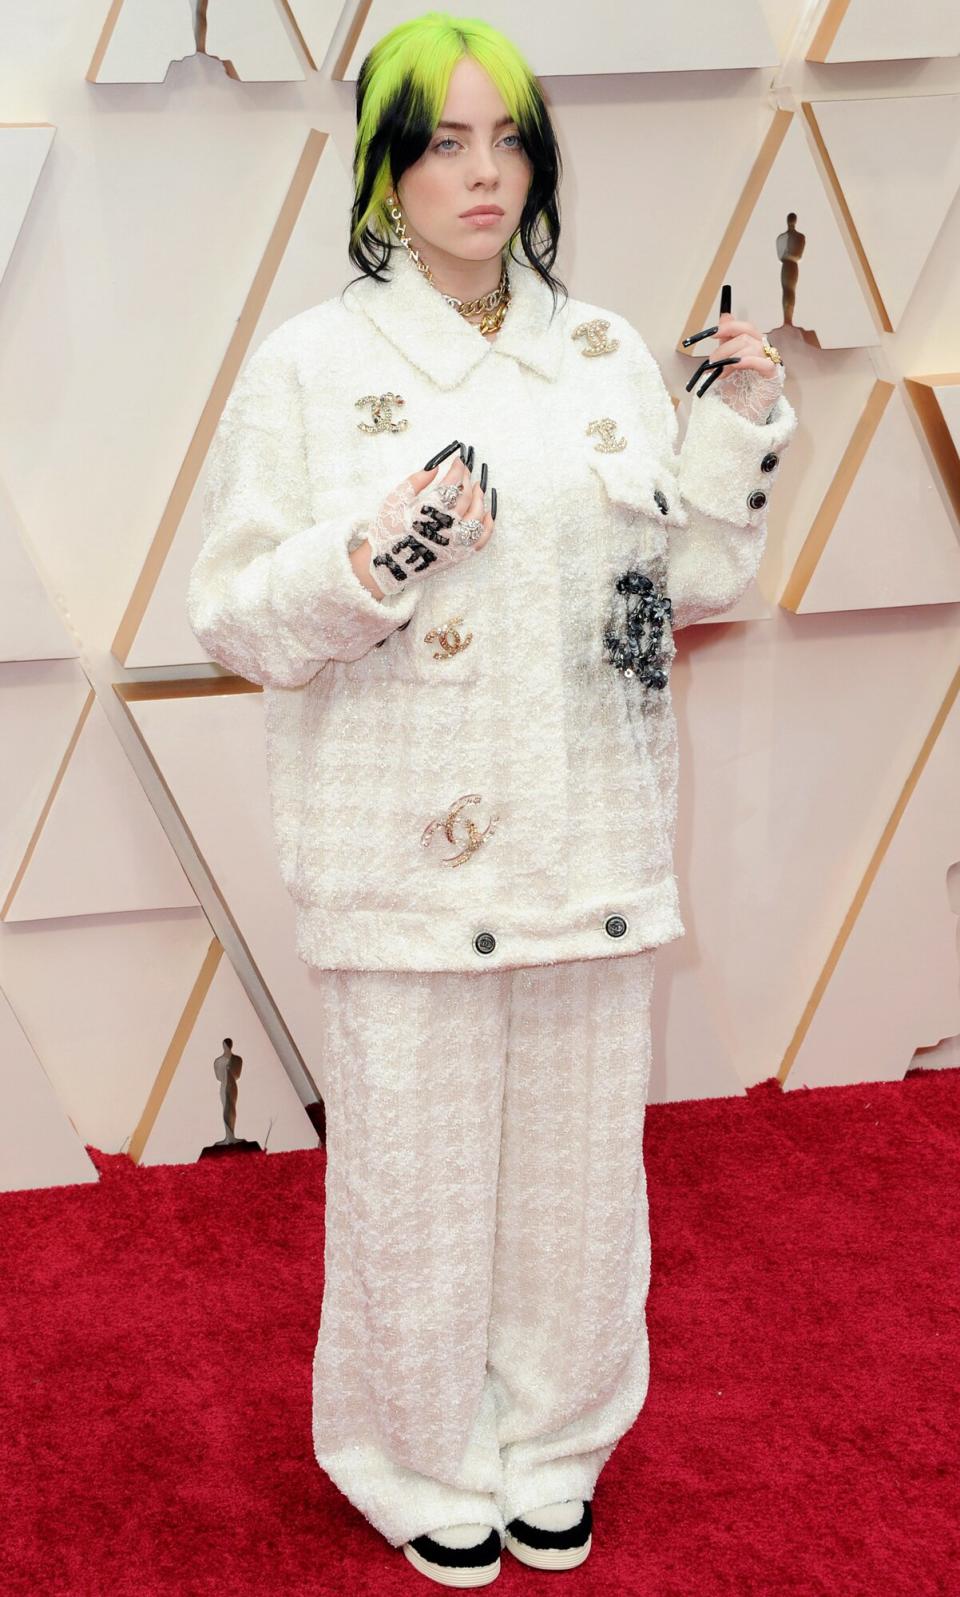 Billie Eilish arrives at the 92nd Annual Academy Awards at Hollywood and Highland on February 09, 2020 in Hollywood, California.